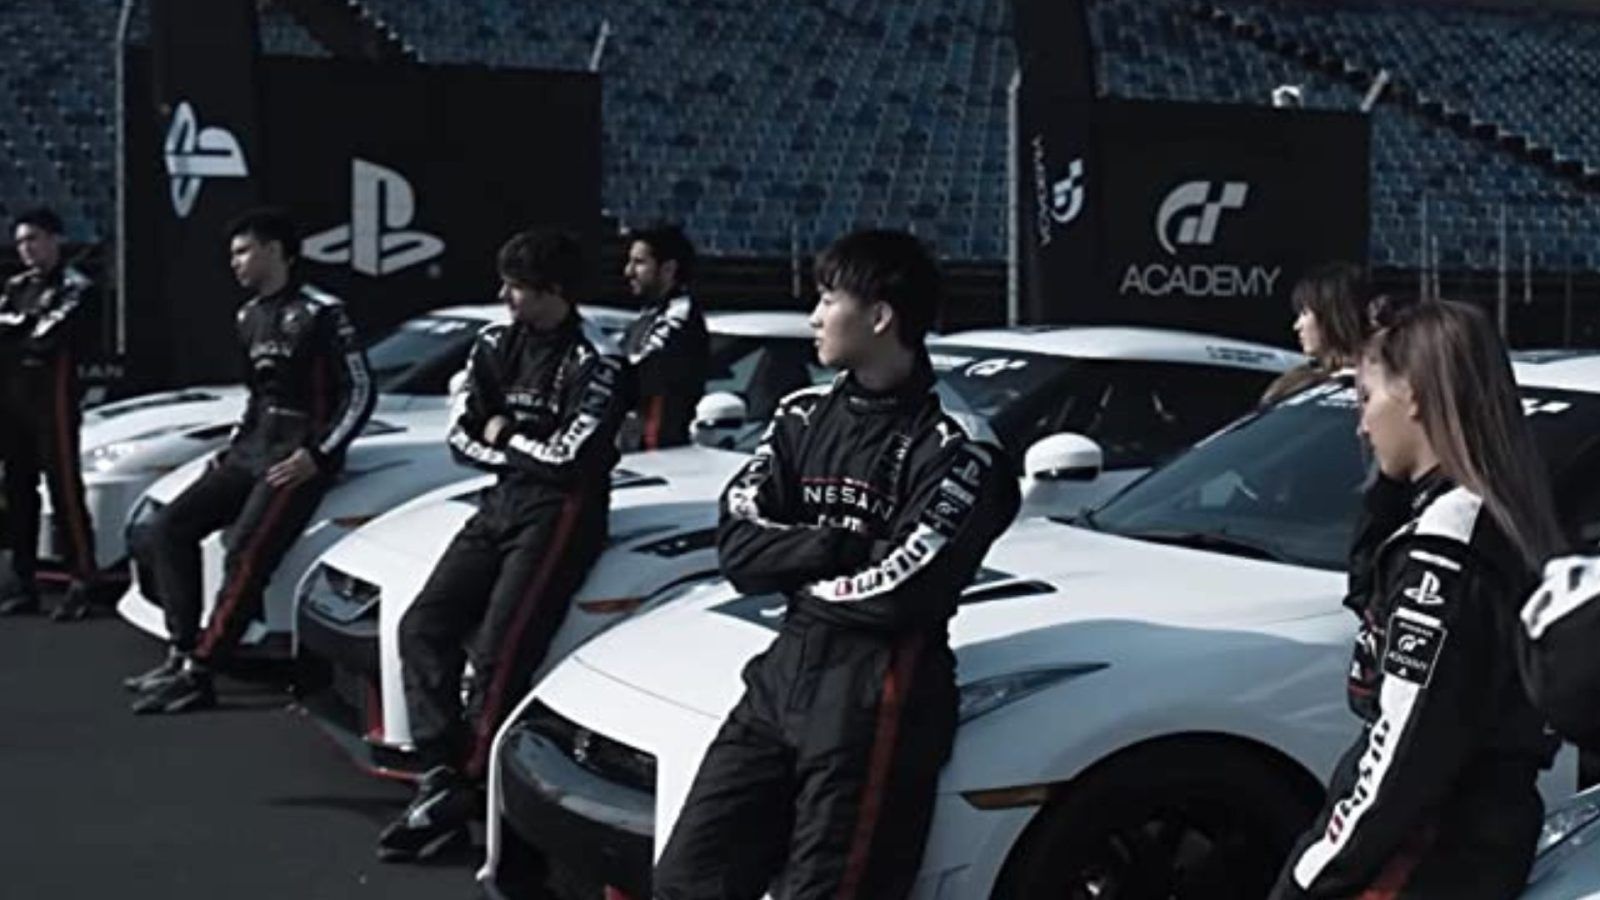 Gran Turismo trailer: Plot, cast and other details about the movie